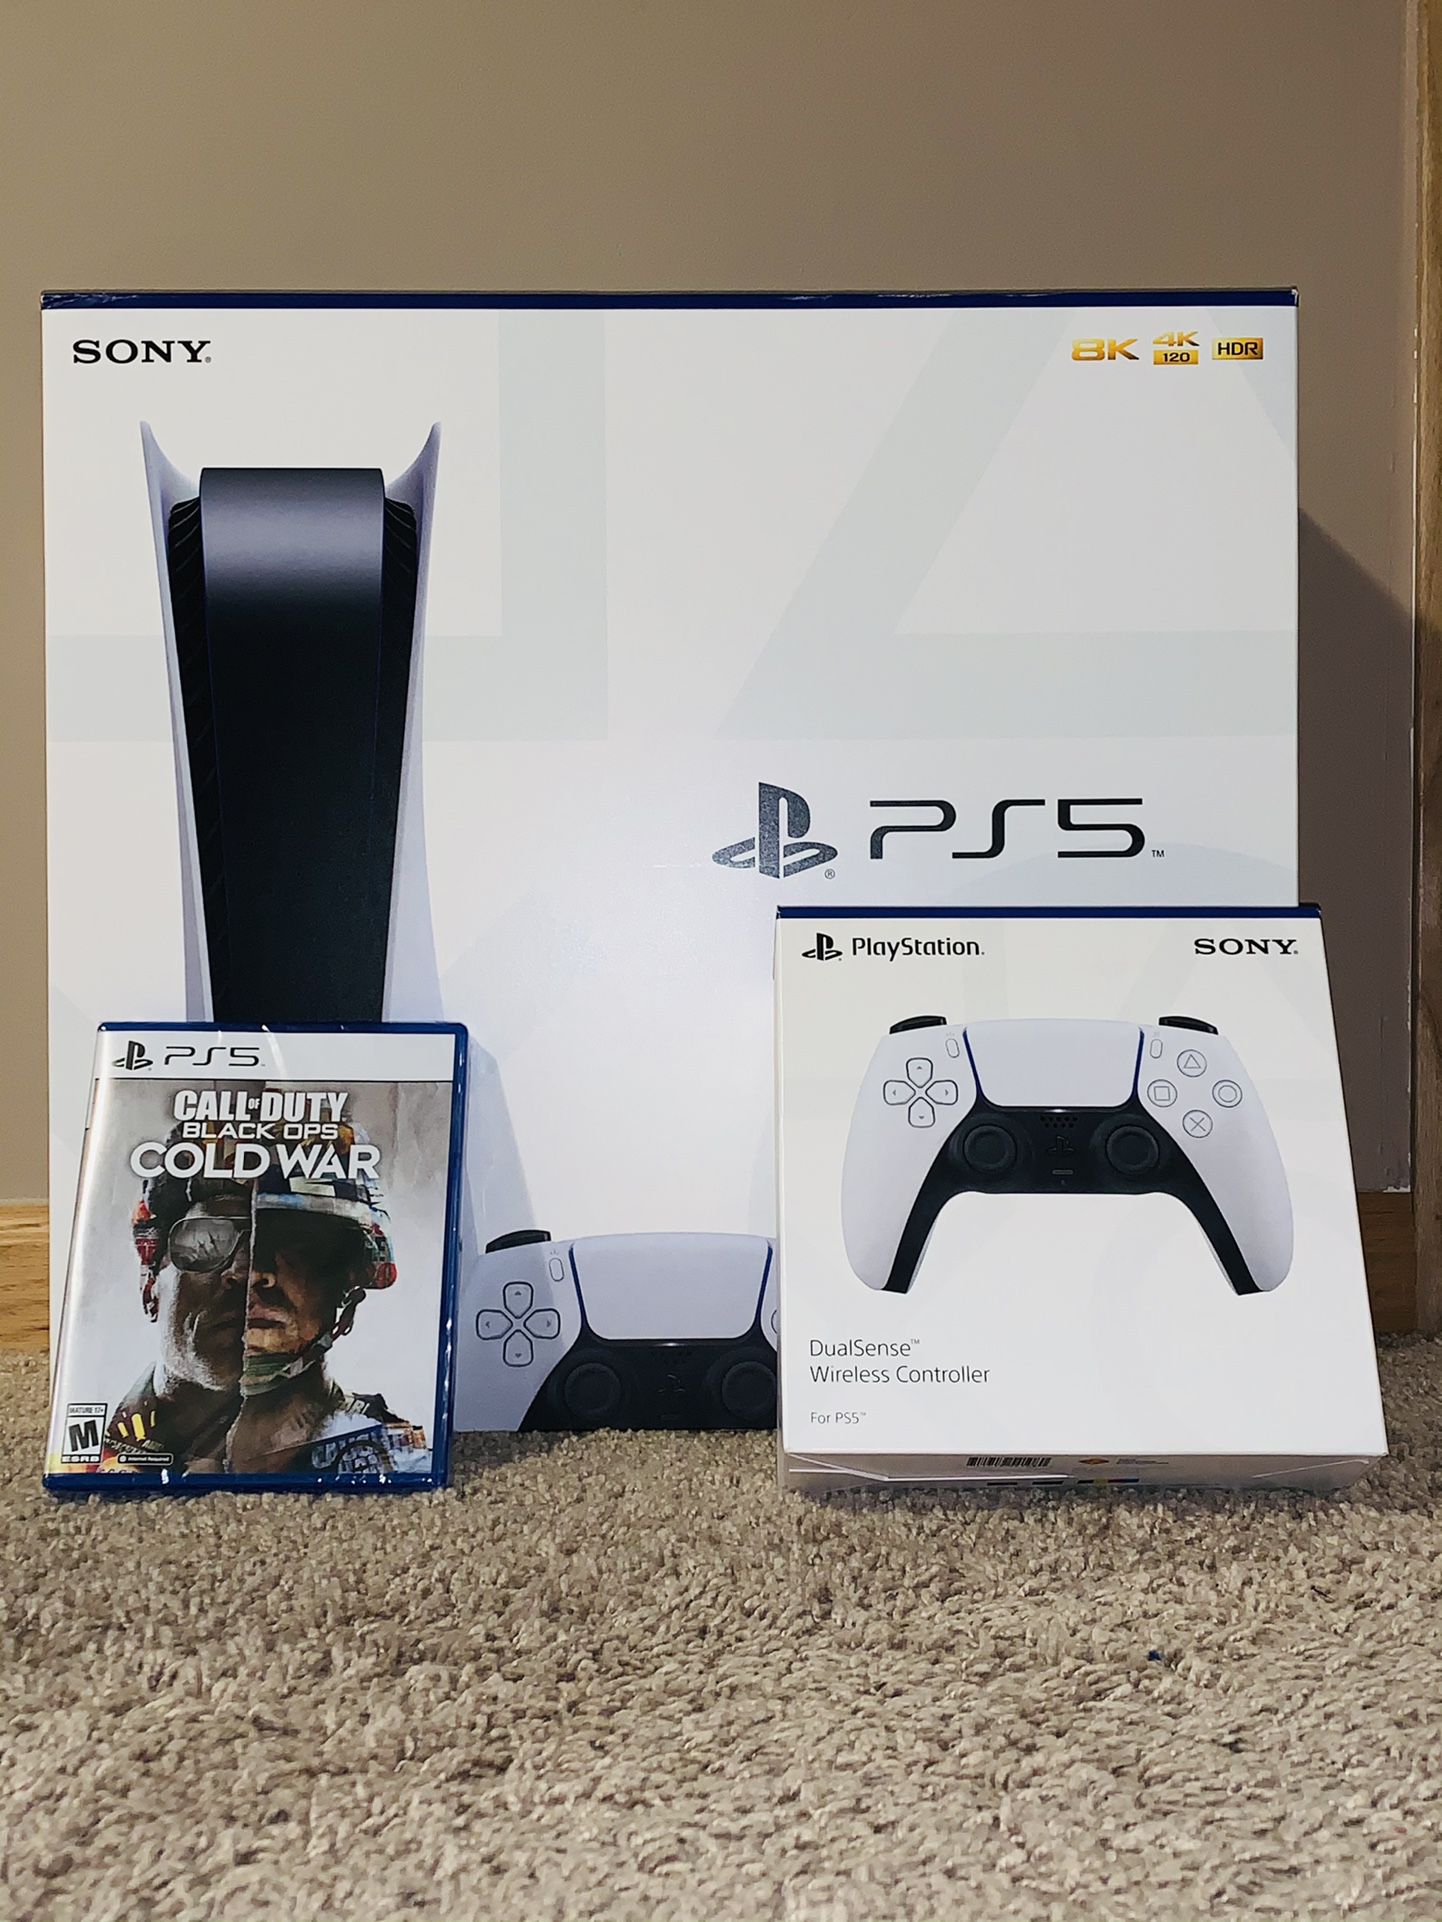 PS 5 with, extra controller, and Call of Duty Black OPS Cold War video game.